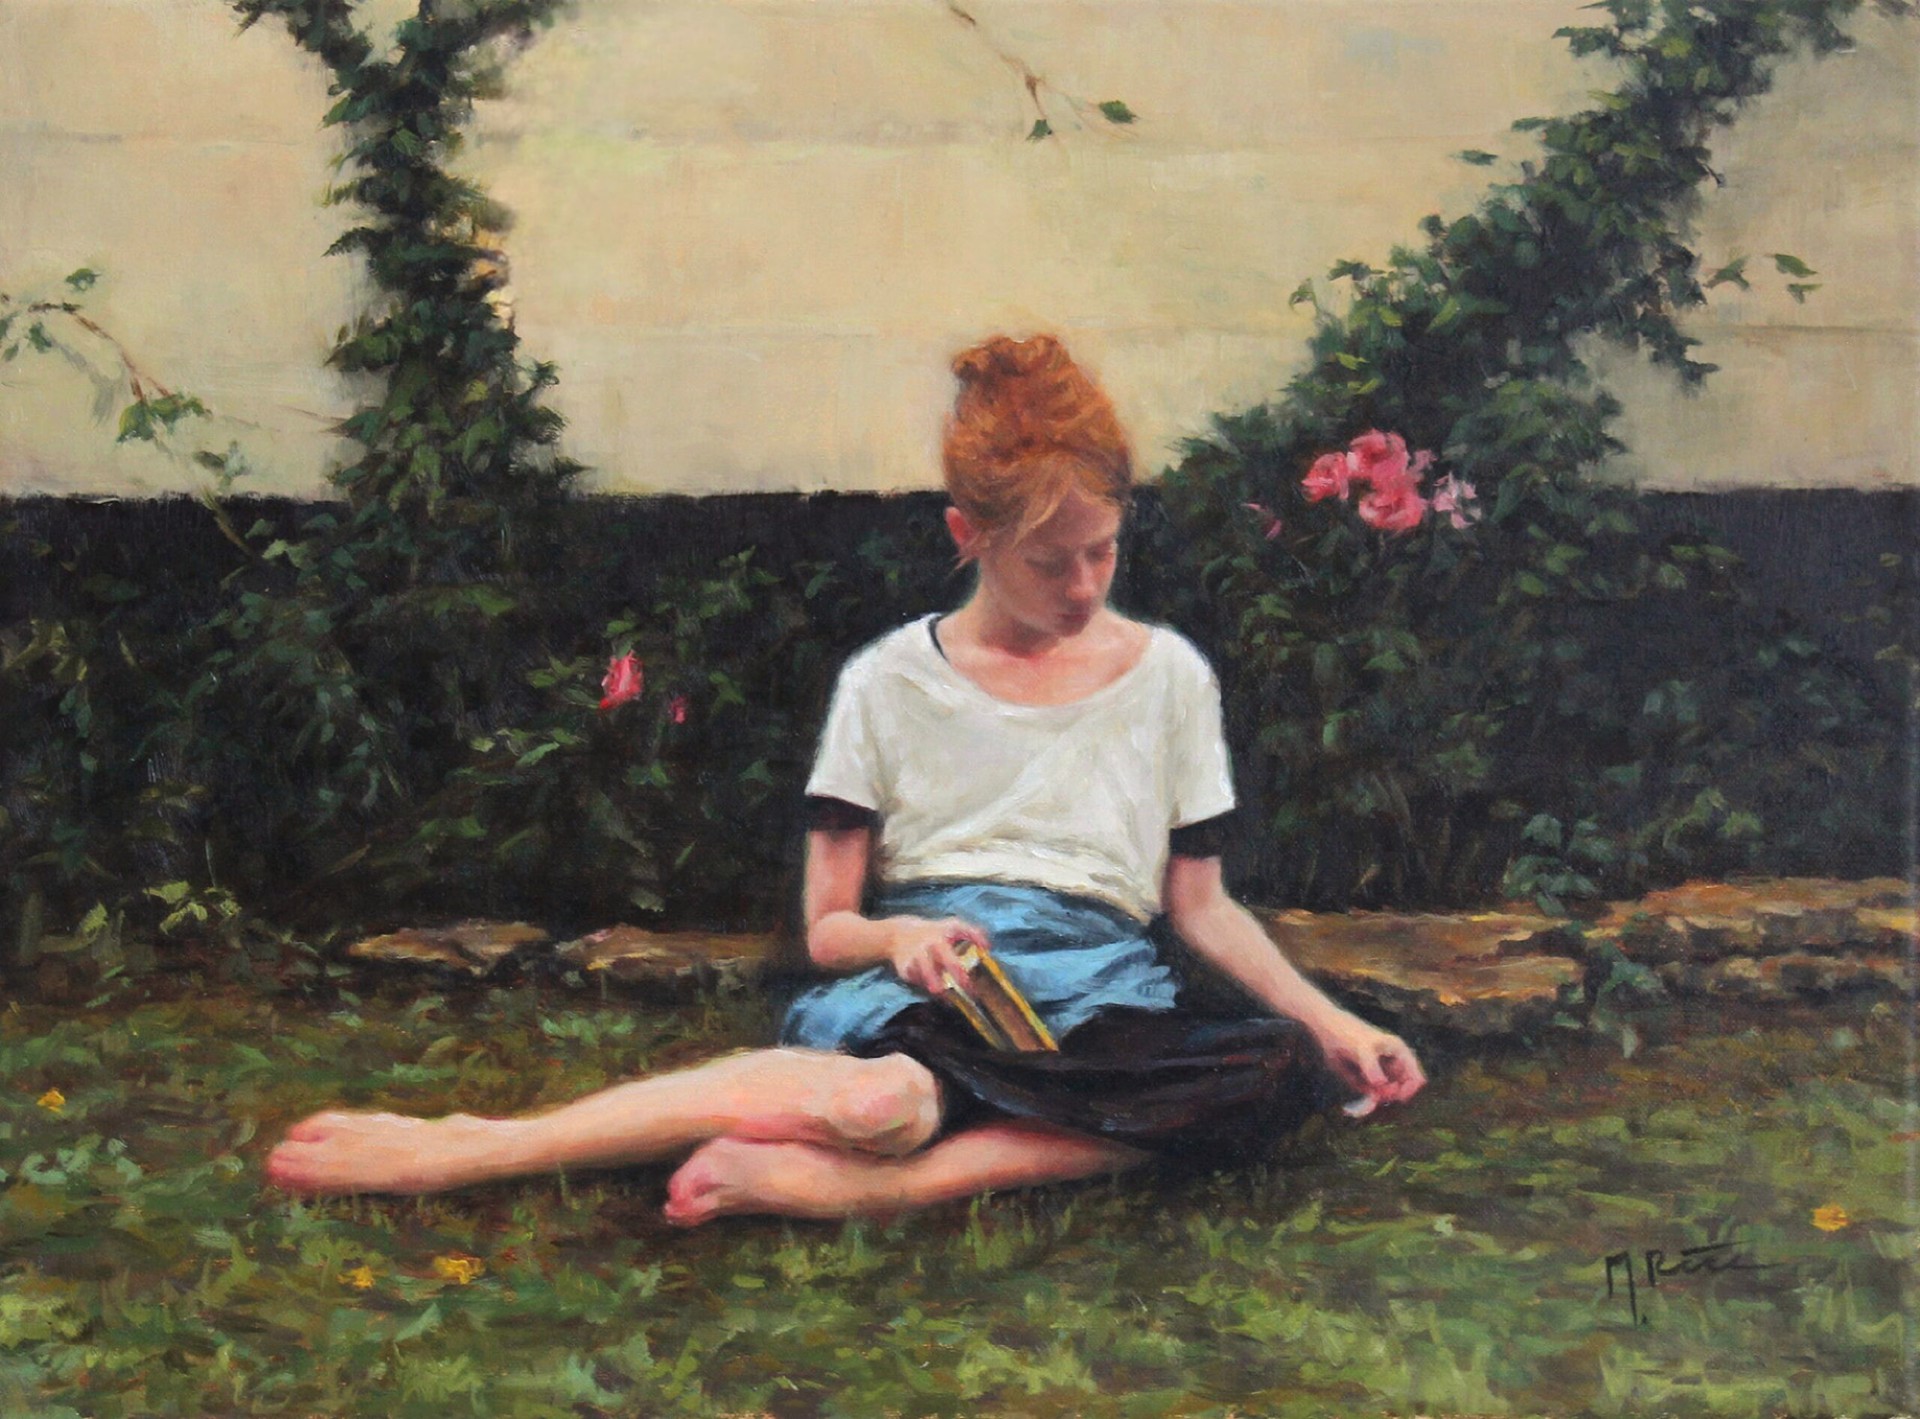 Marianne Kay Rice "Some Sunday Afternoons" by Oil Painters of America